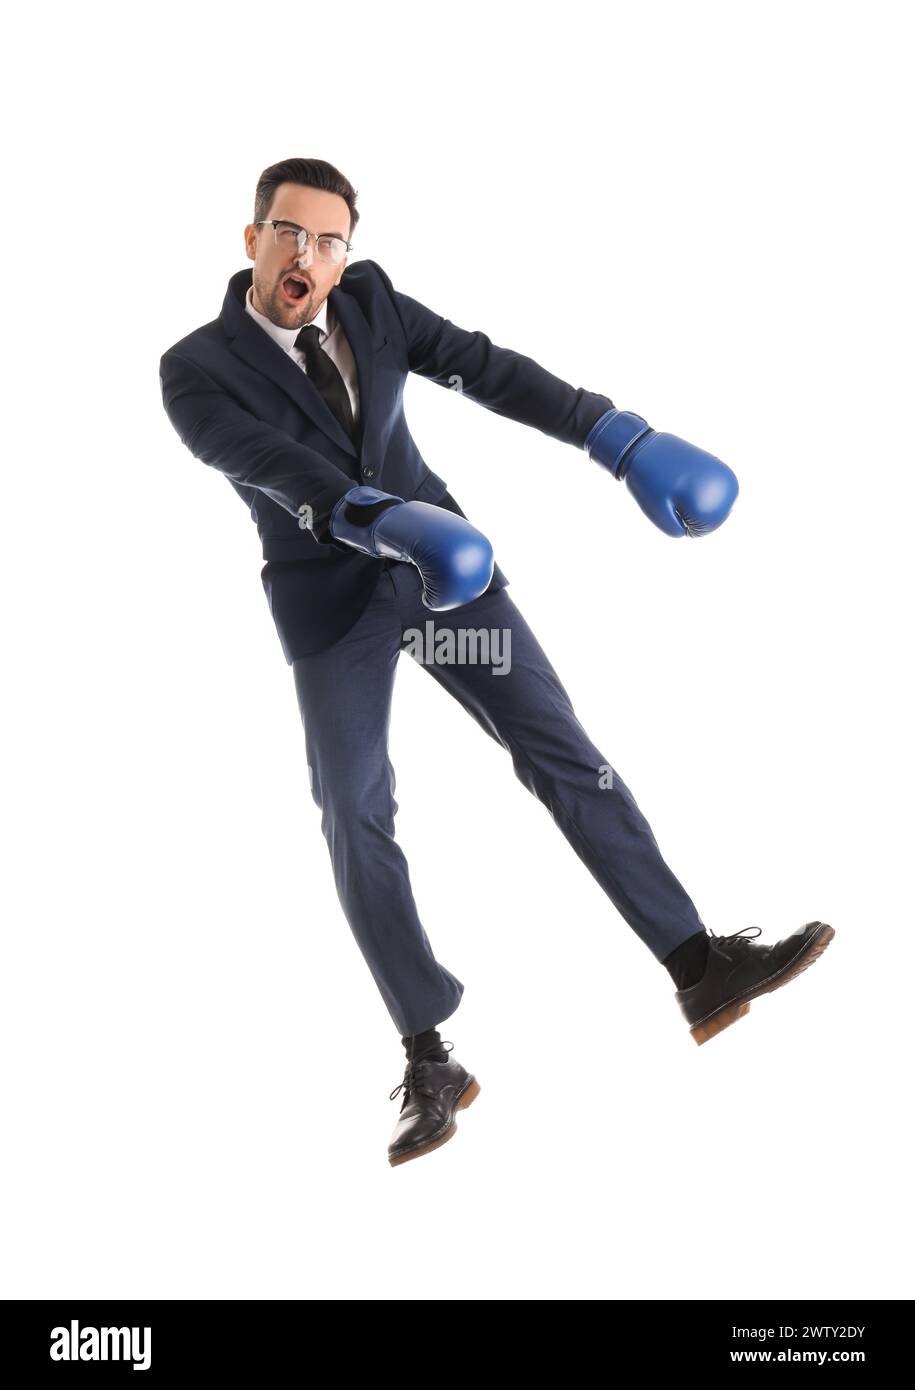 Funny businessman in boxing gloves jumping on white background Stock Photo